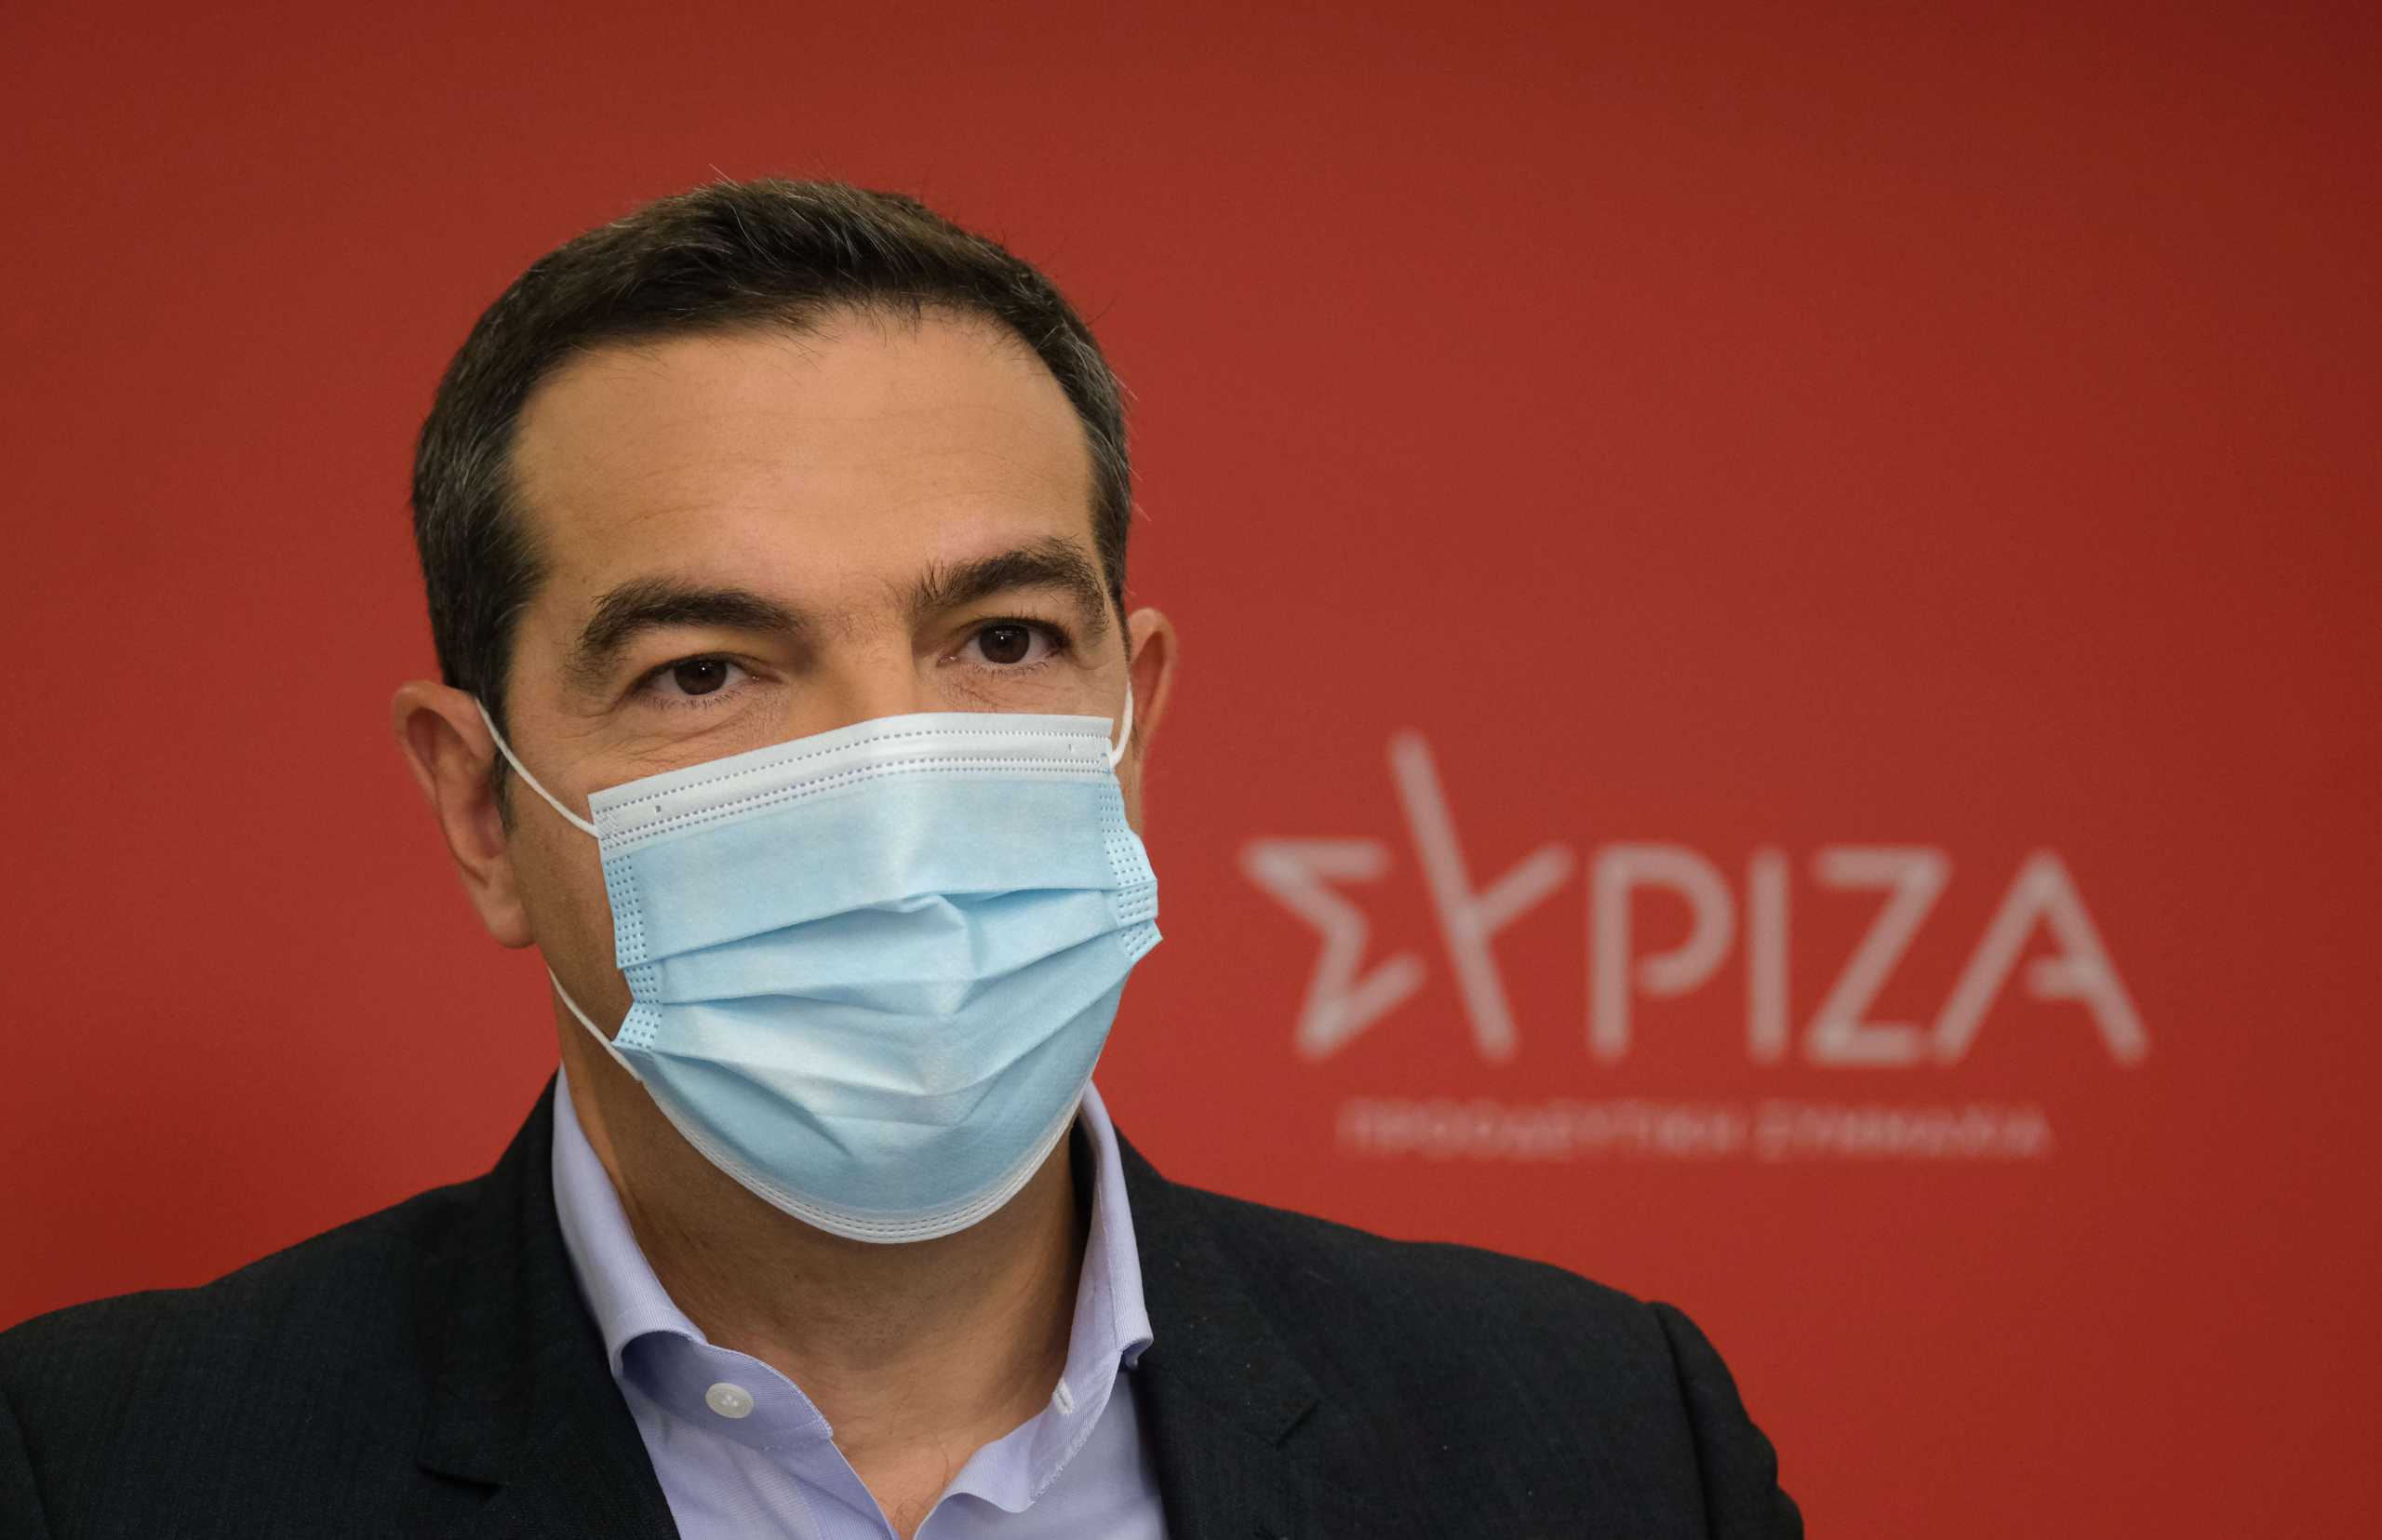 Tsipras: “We will fight not to make the habit loss in this place”